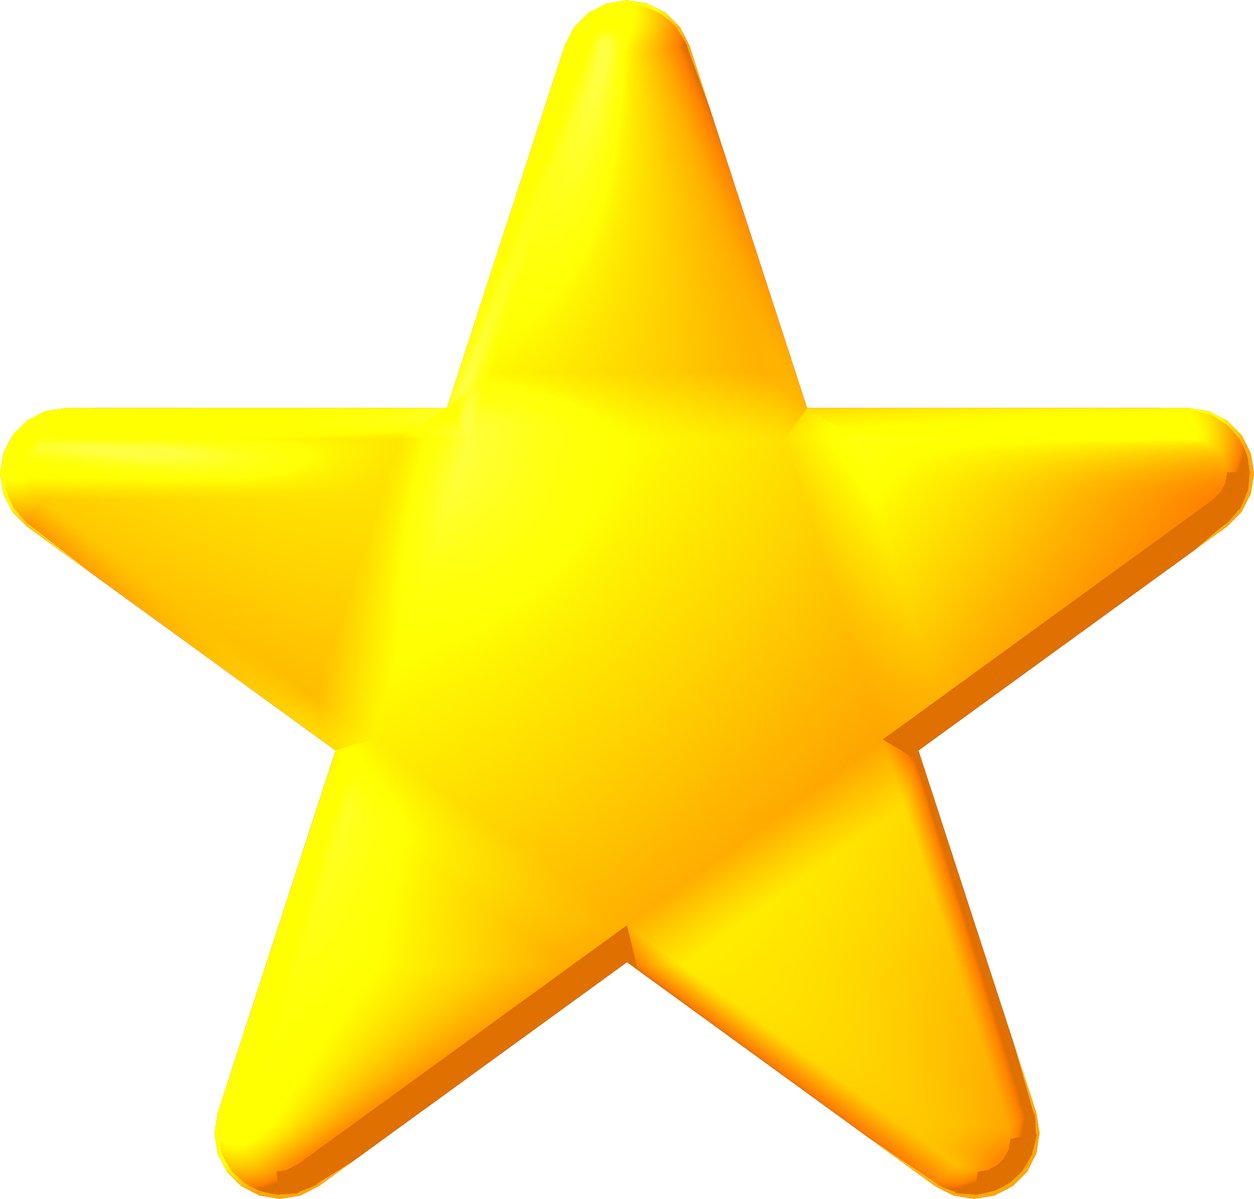 a shiny, yellow star is an icon